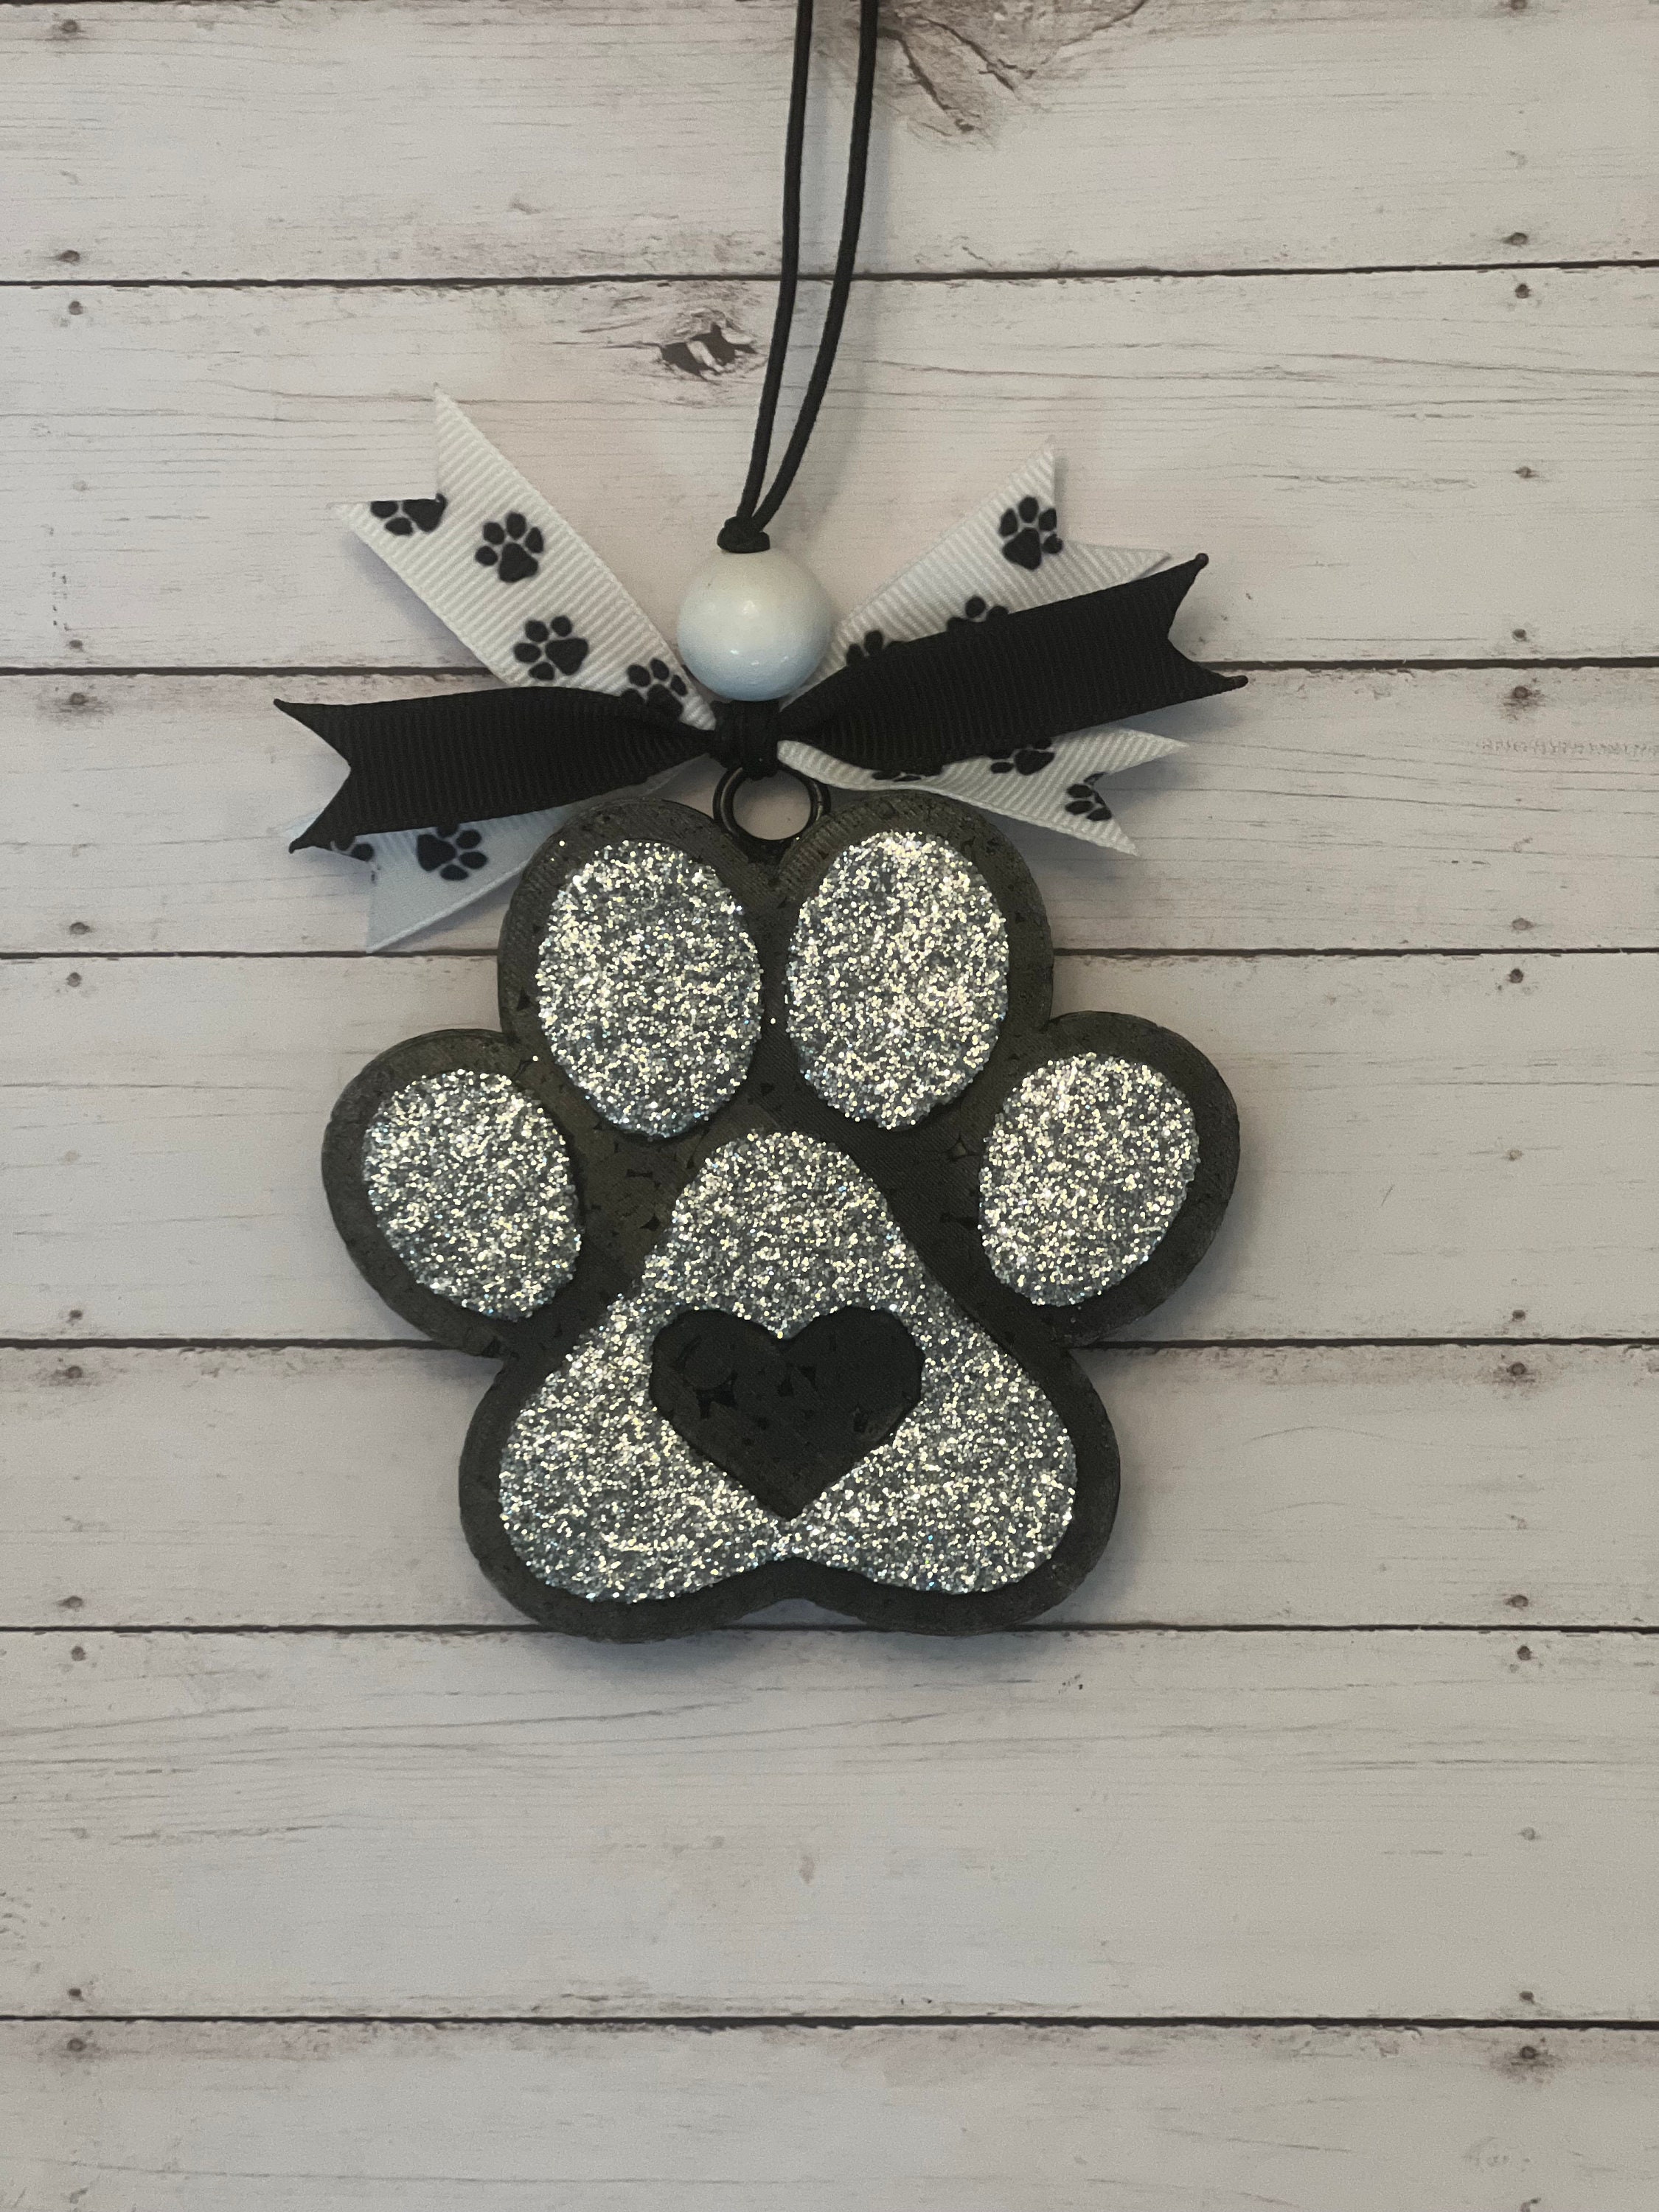 Paw print ribbon in black and white for pet gifts printed on 7/8 white  satin